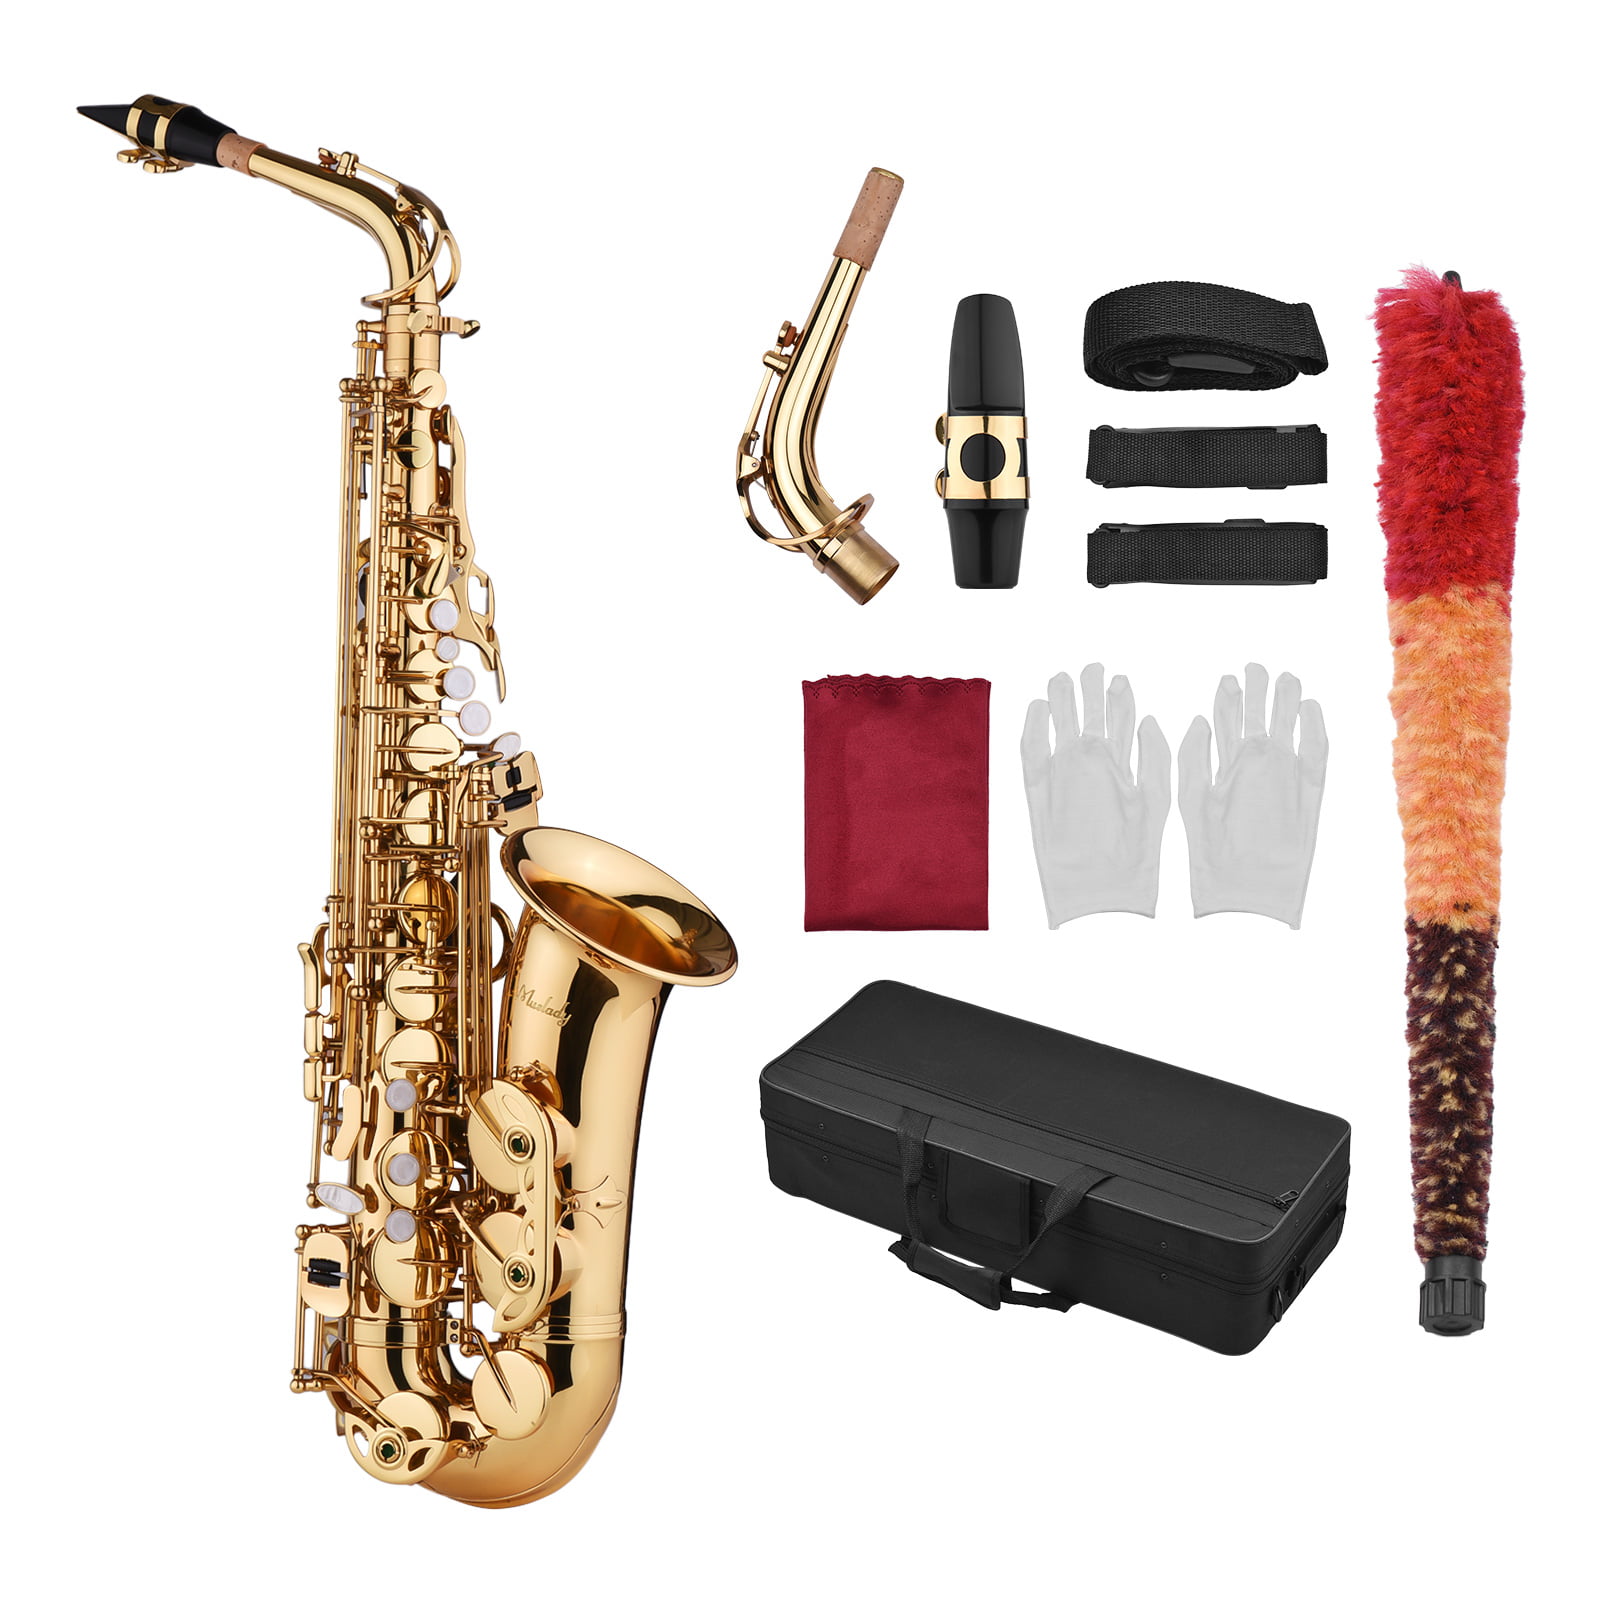 FUN MACHINE PACK OF 2 PLASTIC SAXOPHONE FOR KIDS PARTIES 